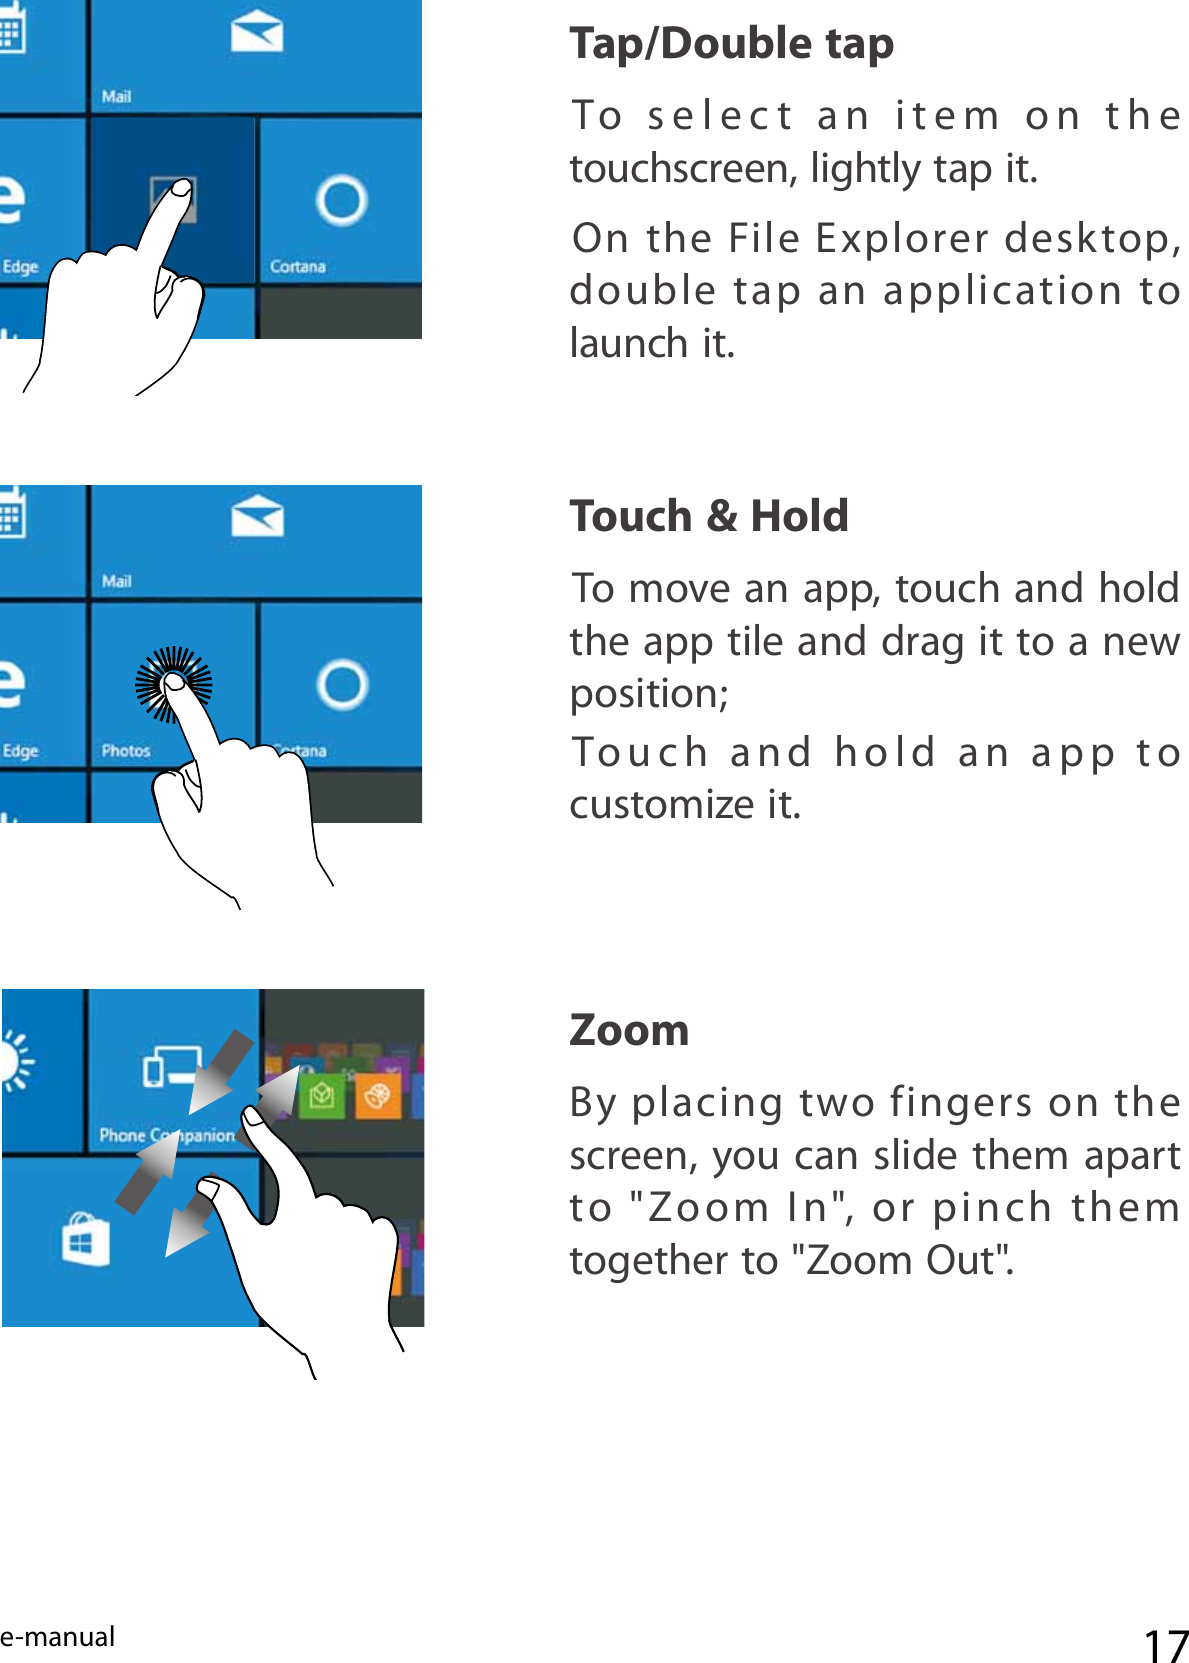 e-manual 17Zoom  By  placing two  fingers  on  the screen, you can slide them apart to  &quot;Zoom  In&quot;,  or  pinch  them together to &quot;Zoom Out&quot;. Tap/Double tap  To  select  an  item  on  the  touchscreen, lightly tap it.On  the  File  Explorer  desktop, double tap an application to launch it.Touch &amp; Hold To move an app, touch and hold the app tile and drag it to a new position; Touch  and  hold  an  app  to  customize it.